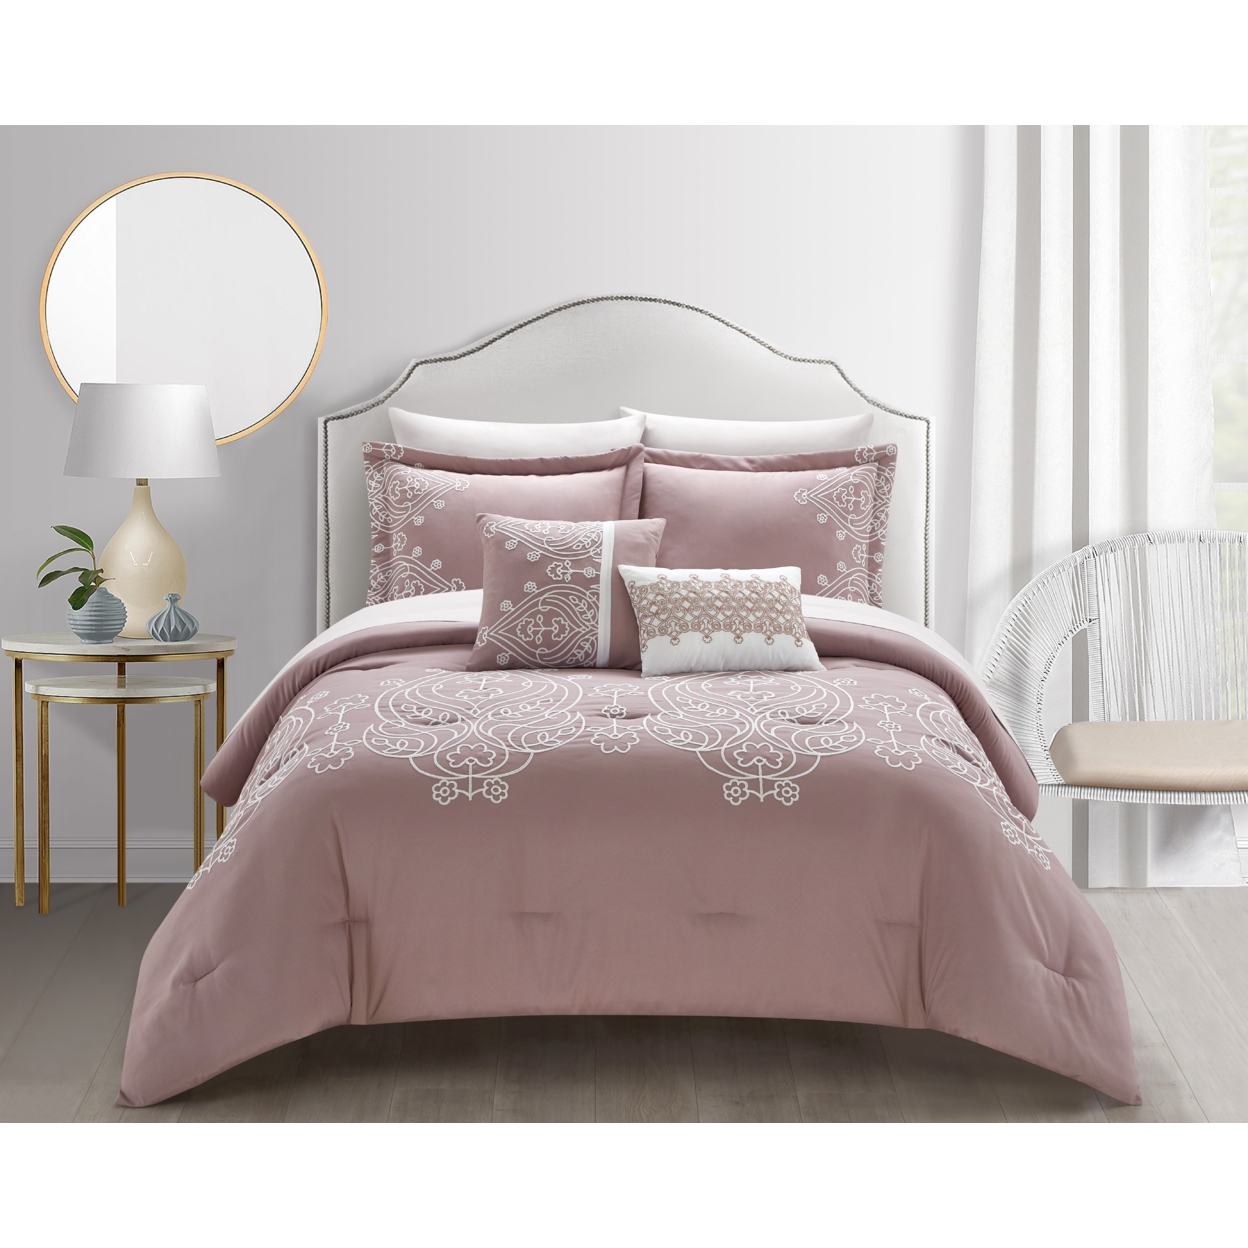 Bibi 5 or 9 Piece Comforter Set Scroll Embroidered Bedding - rose with sheets, queen - 9 piece